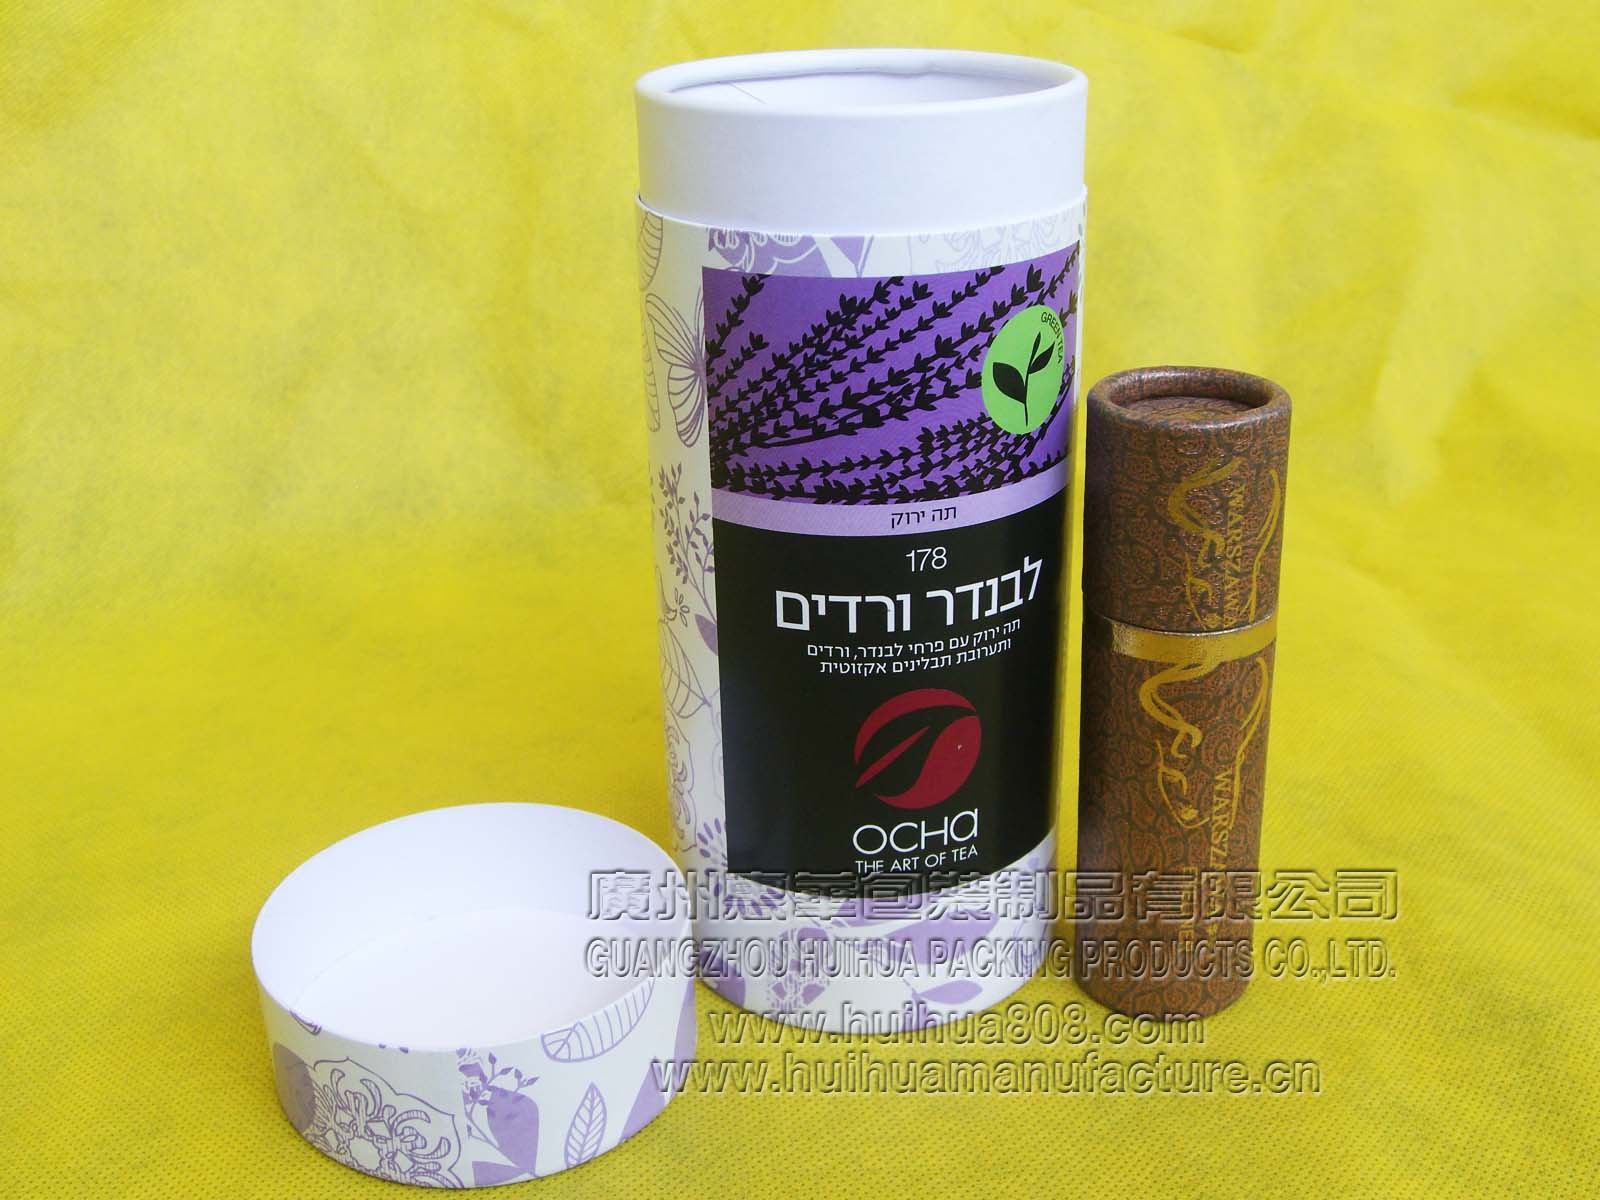 Supply high quality composite paper cans